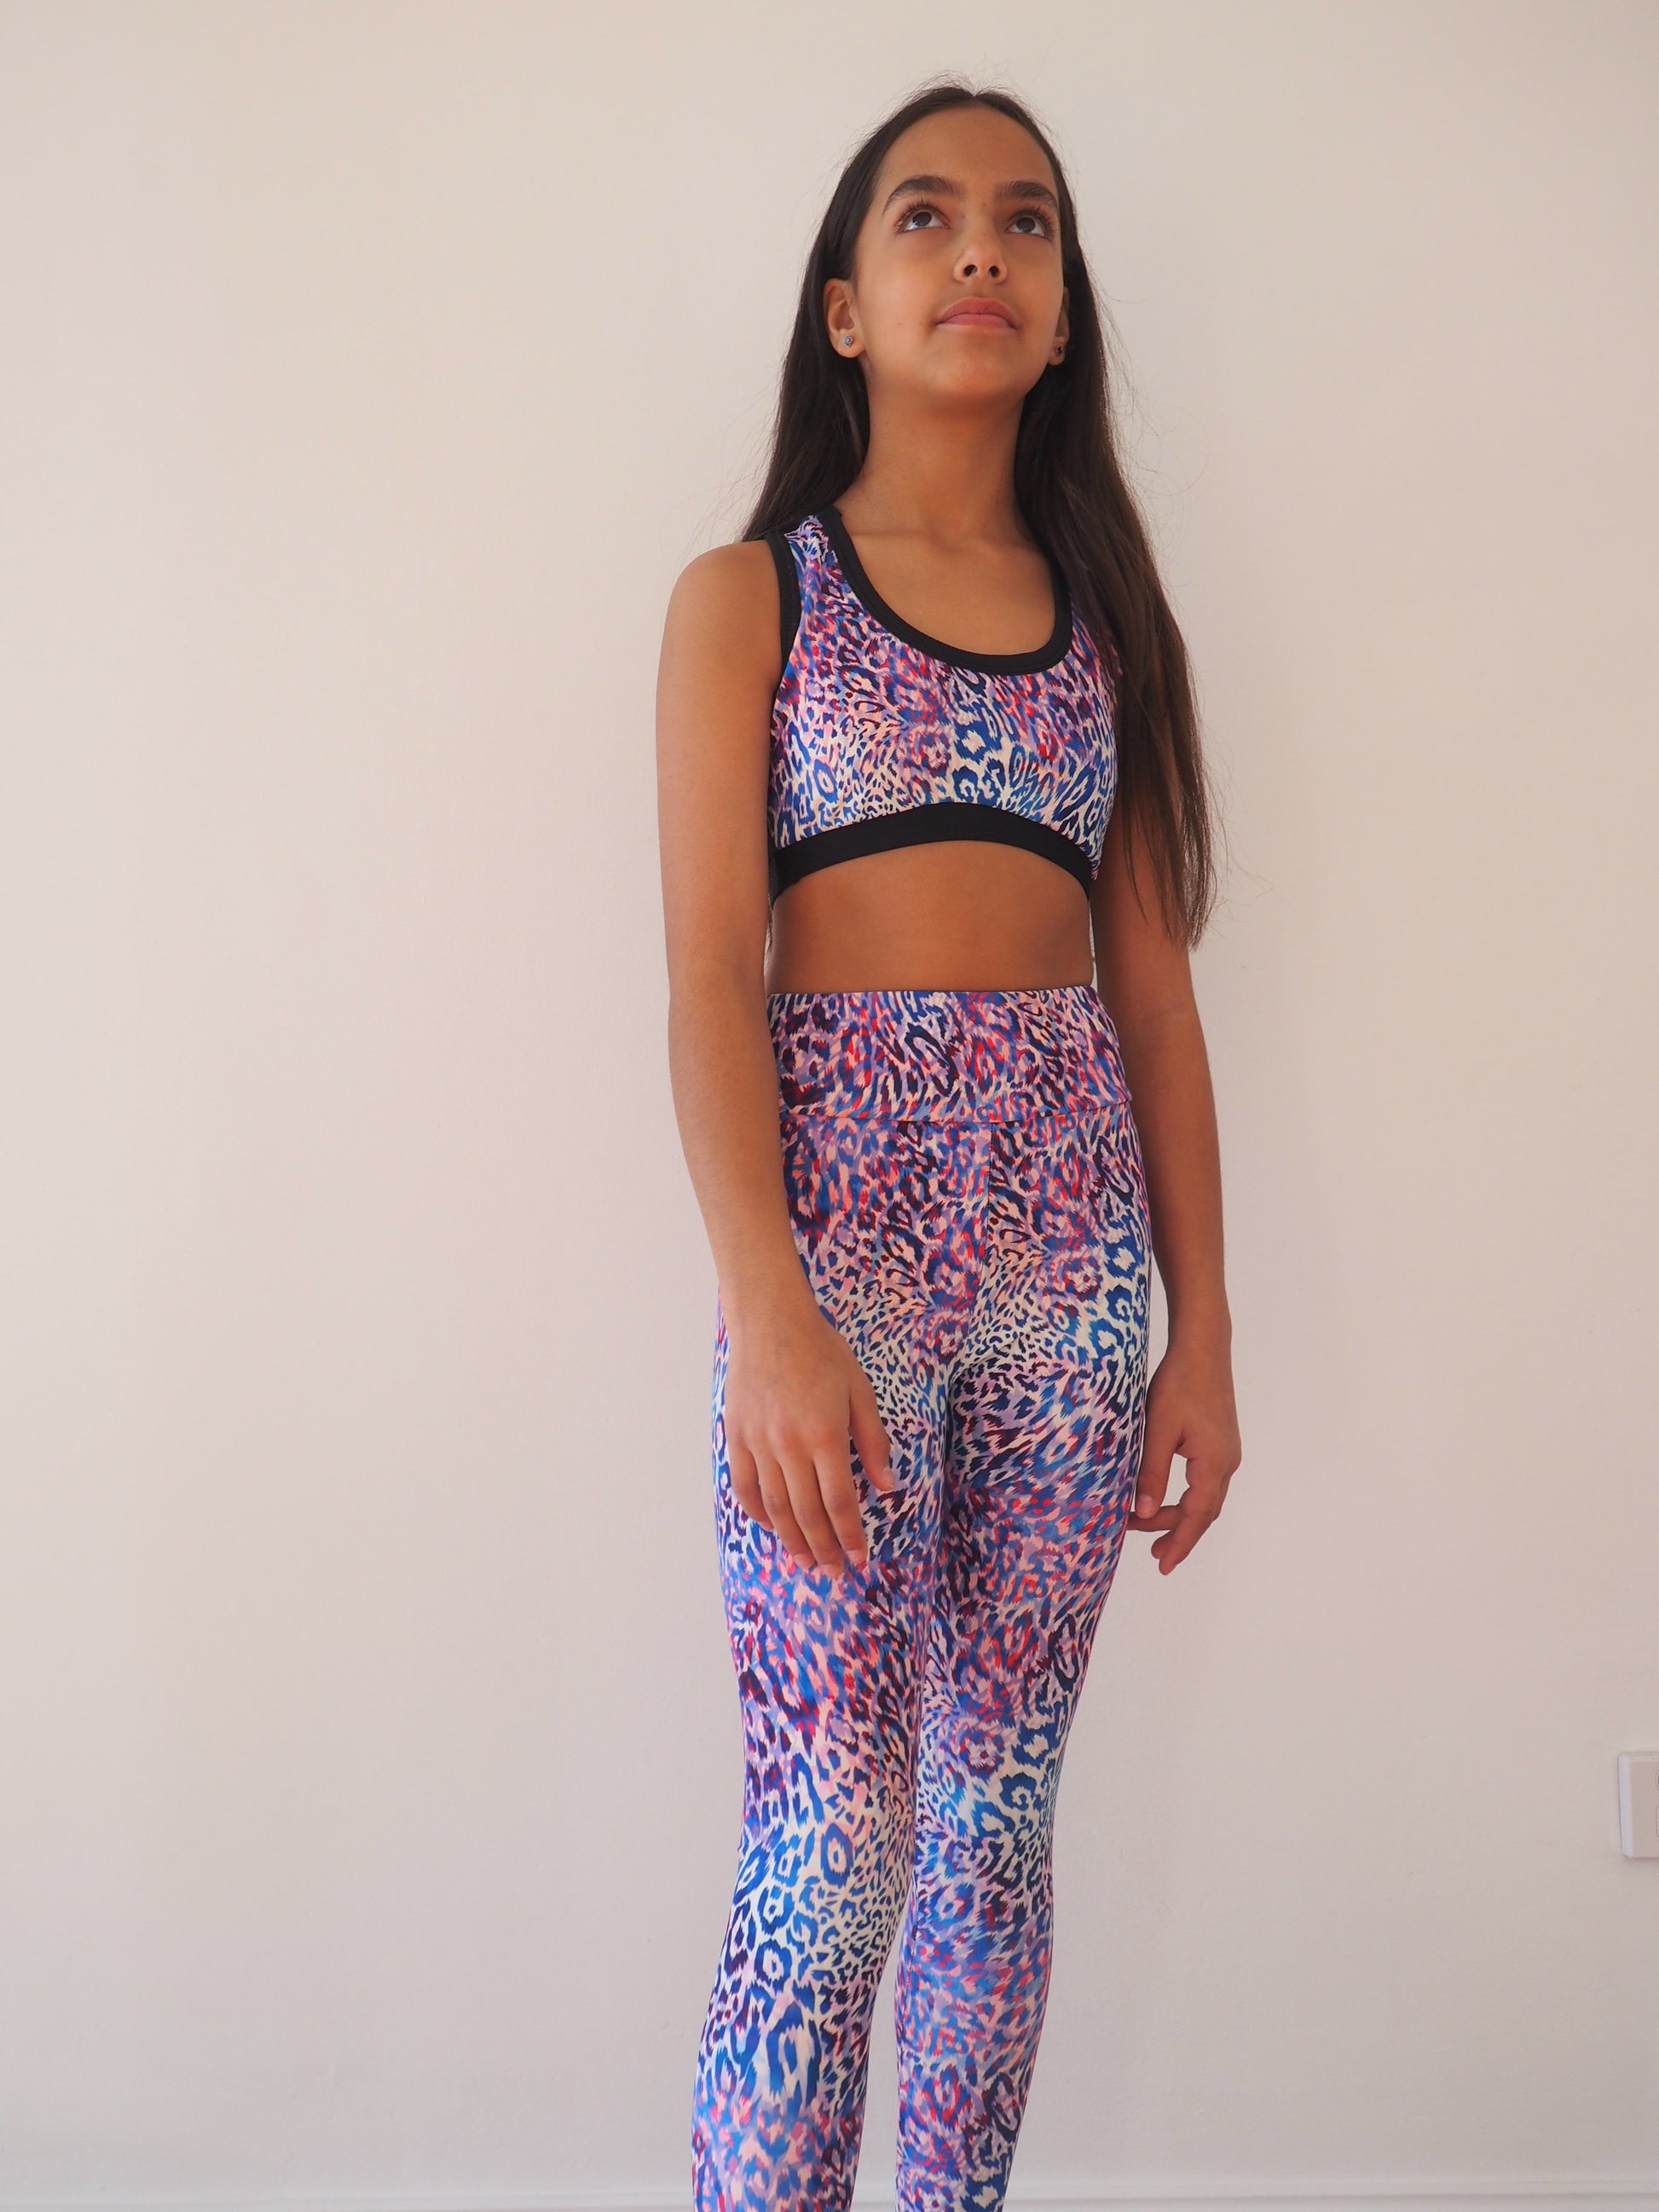  NEON BLUE AND PINK  LEOPARD PRINT  TWEENS COMPRESSION TIGHTS - GERRY CAN 